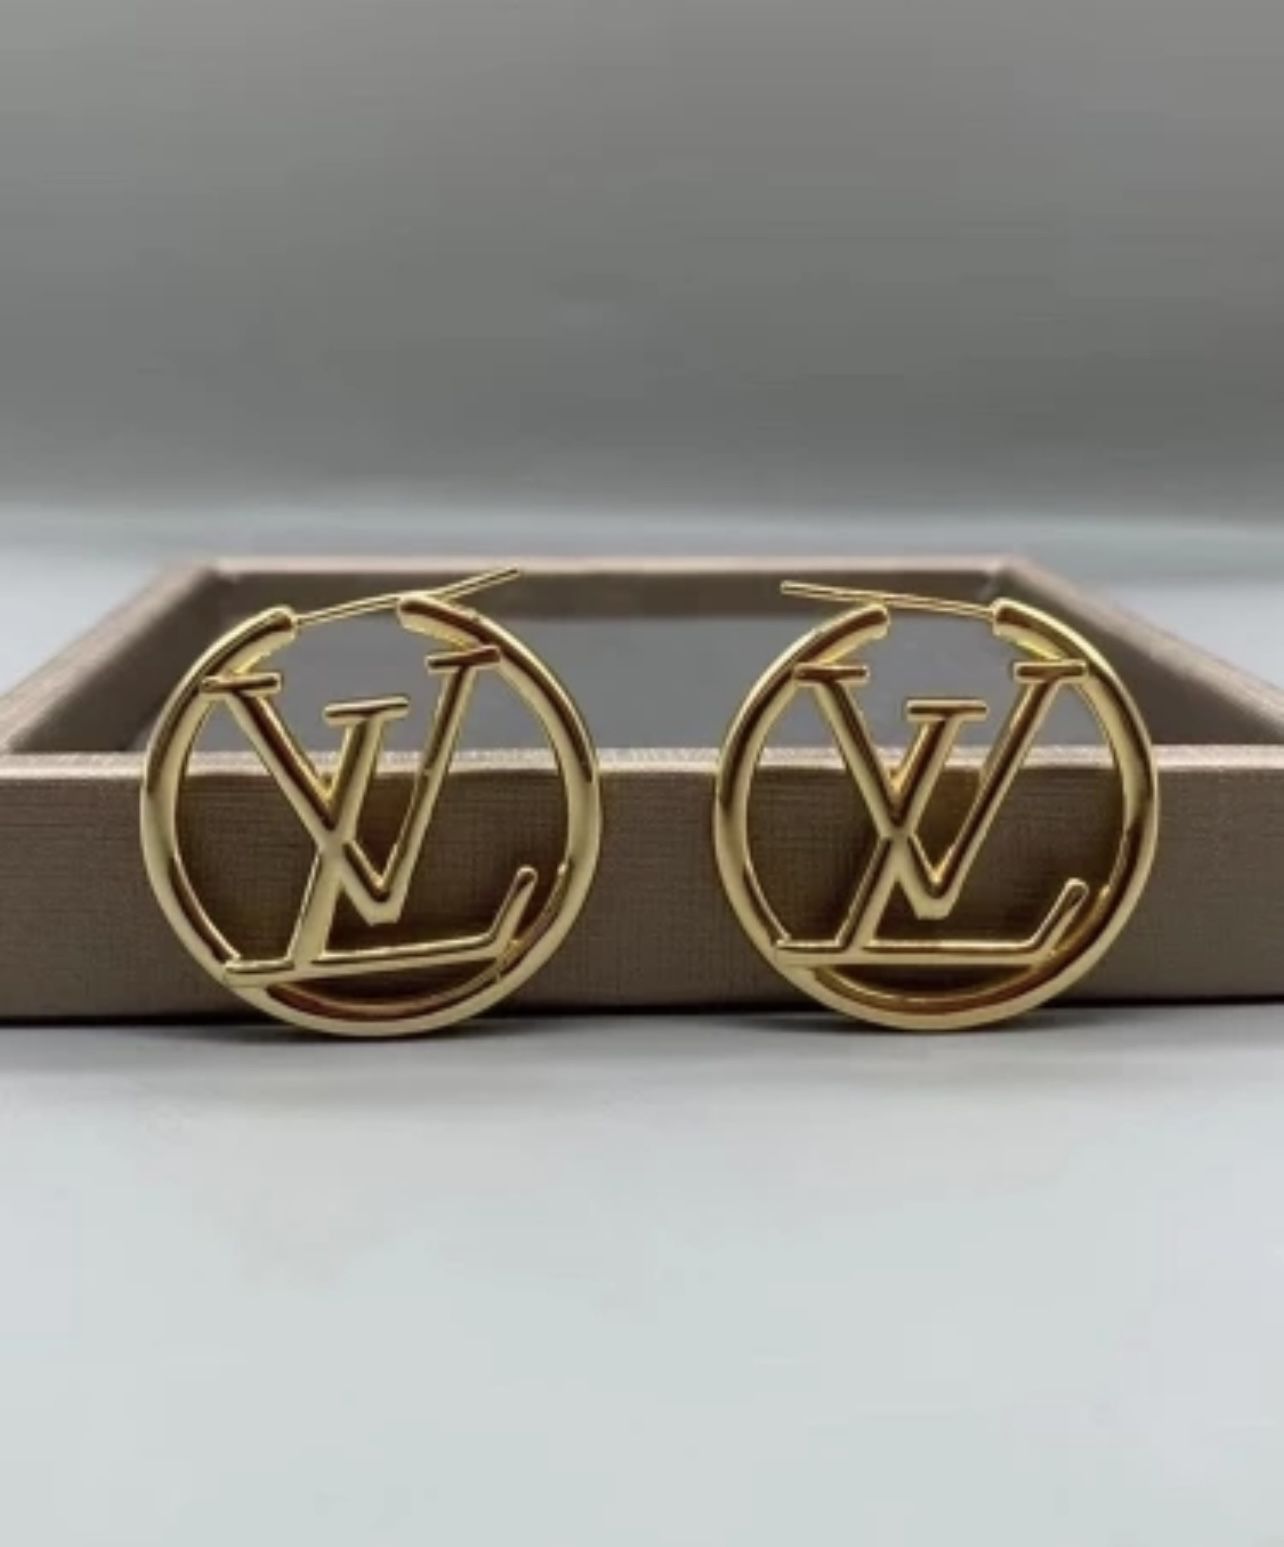 Louis Vuitton Hoop Earrings Gold Large for Sale in Halndle Bch, FL - OfferUp